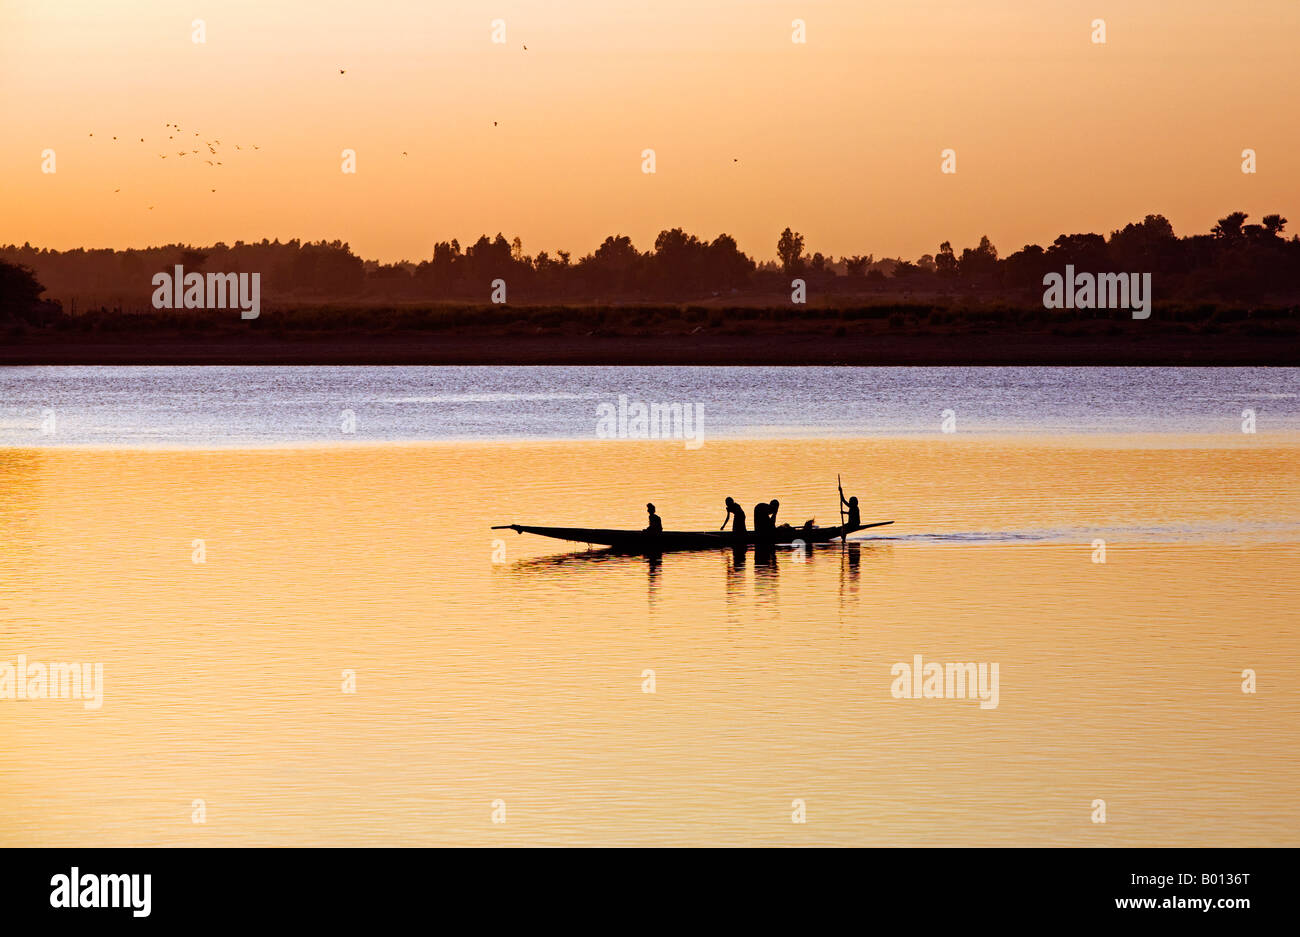 Mali, Mopti. At sunset, a boatman in a pirogue ferries passengers across the Niger River to Mopti. Stock Photo